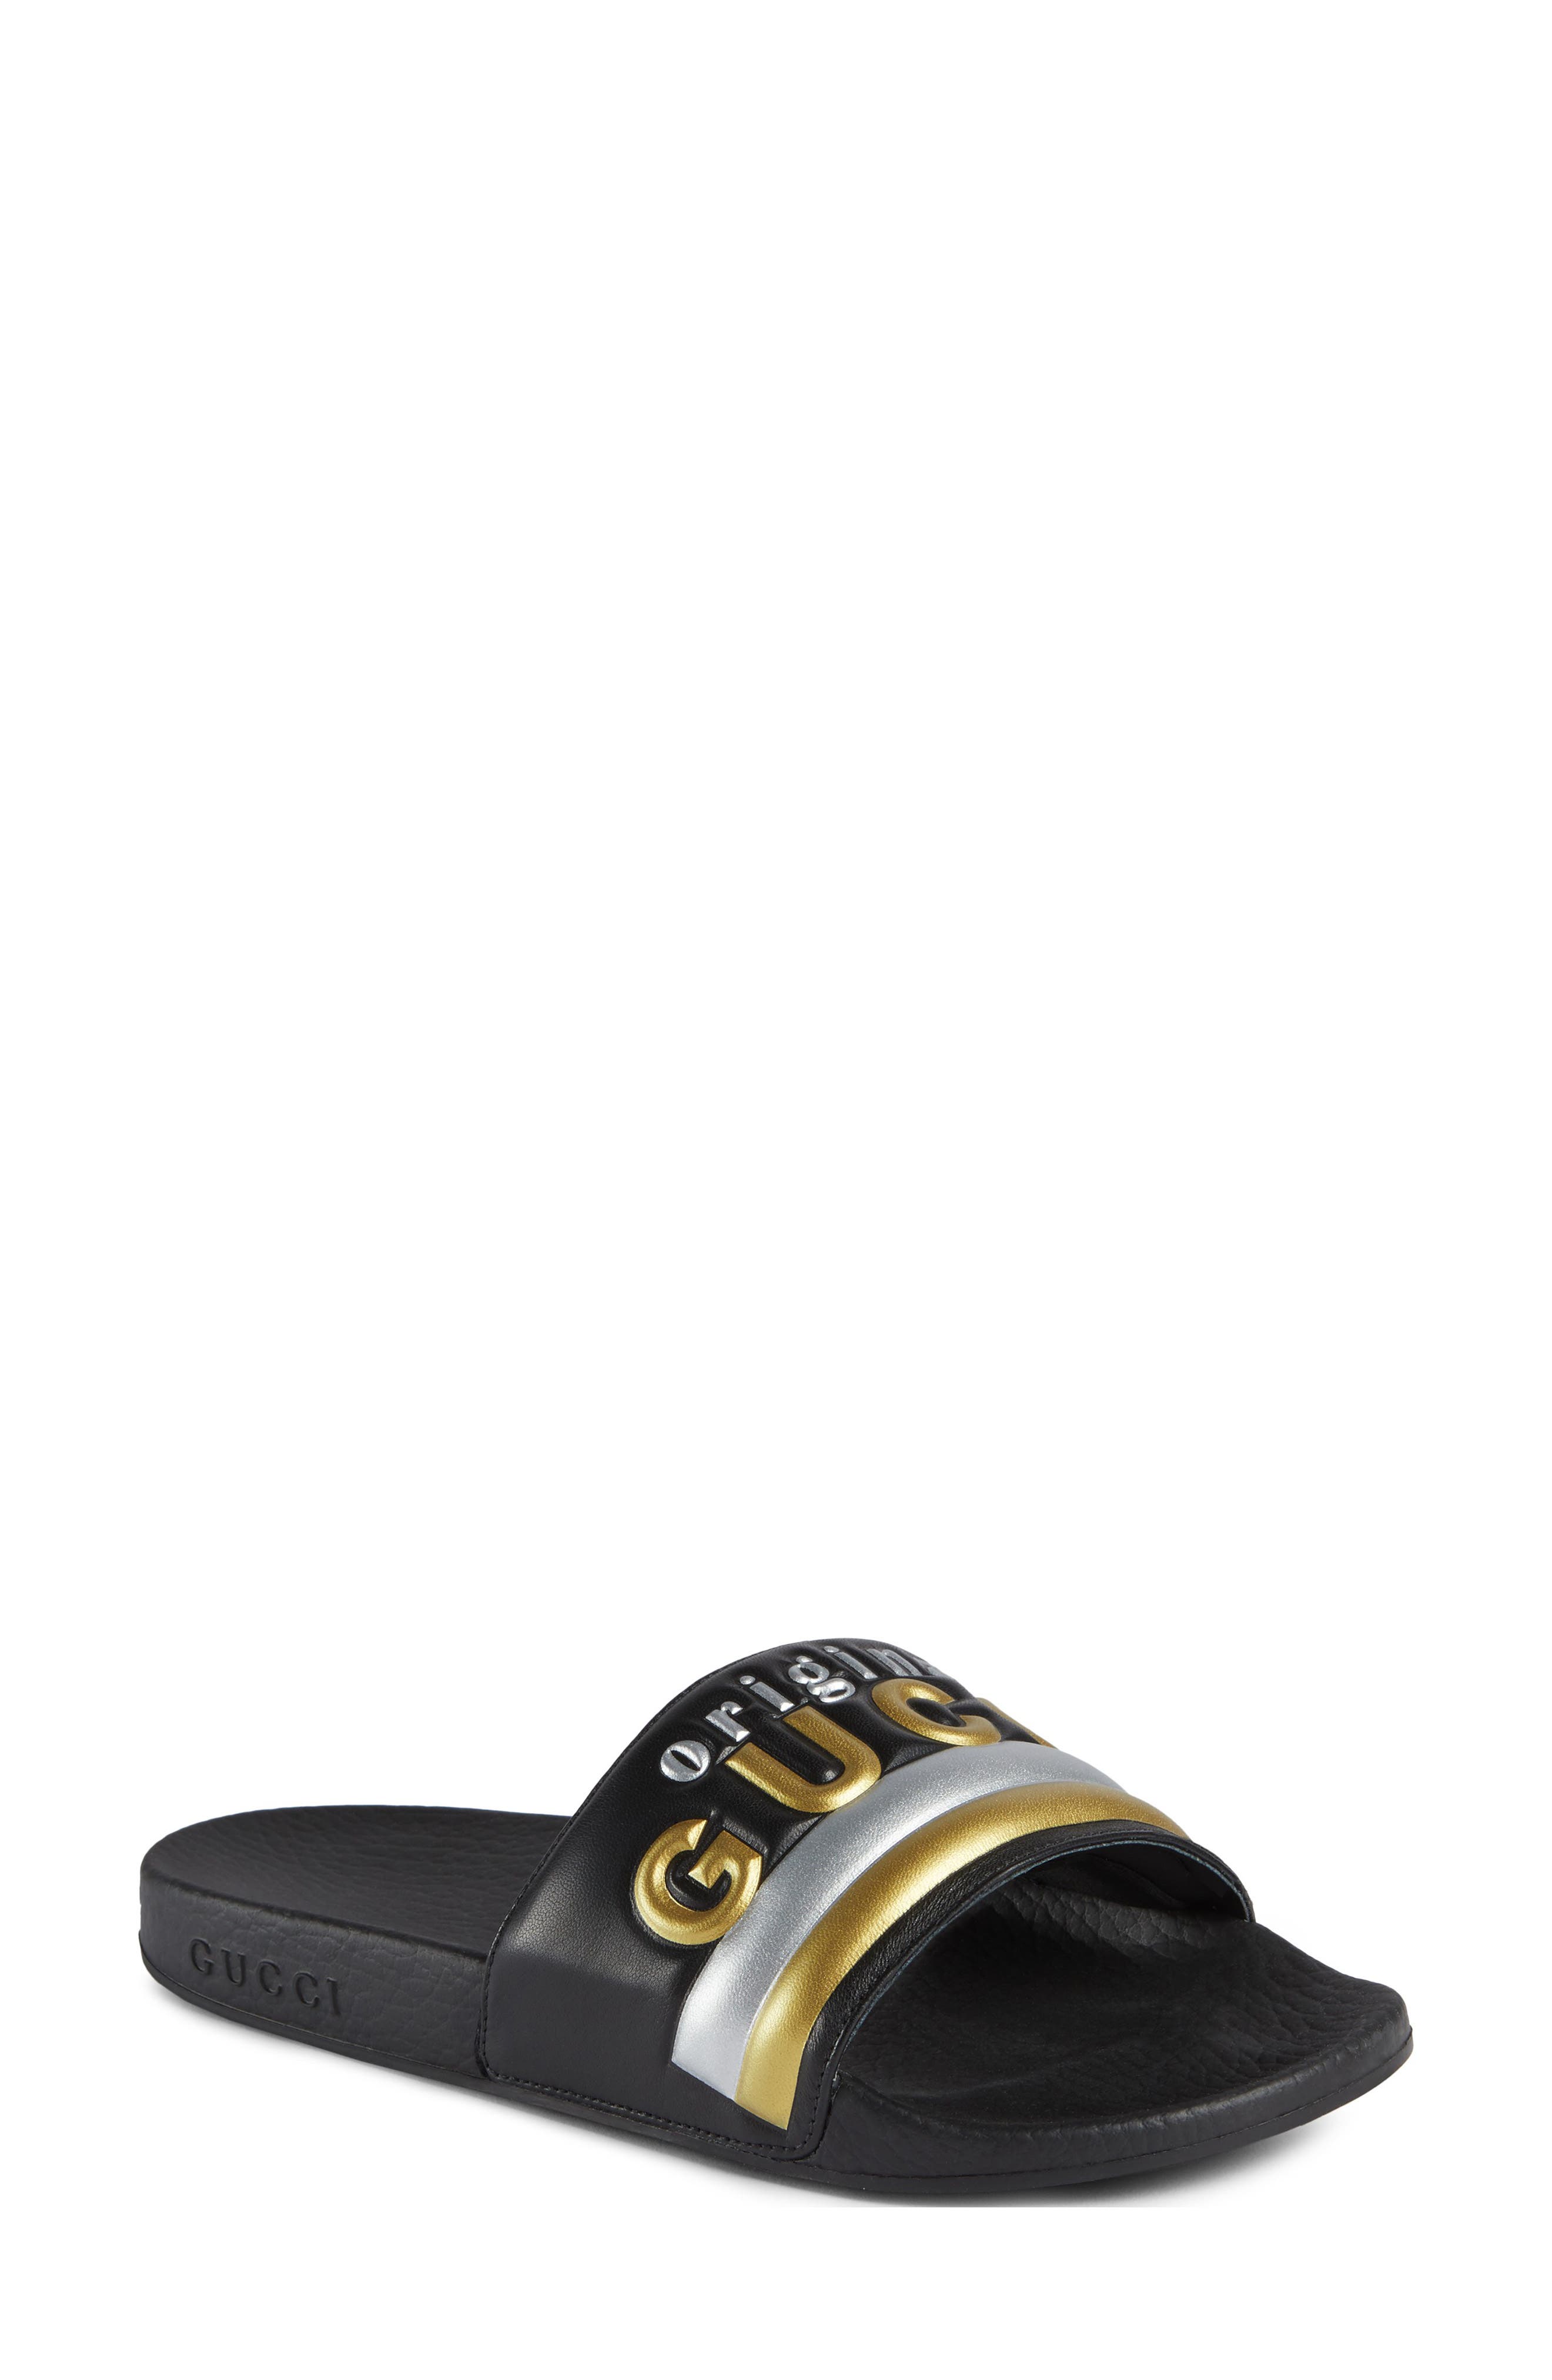 nordstrom gucci womens shoes